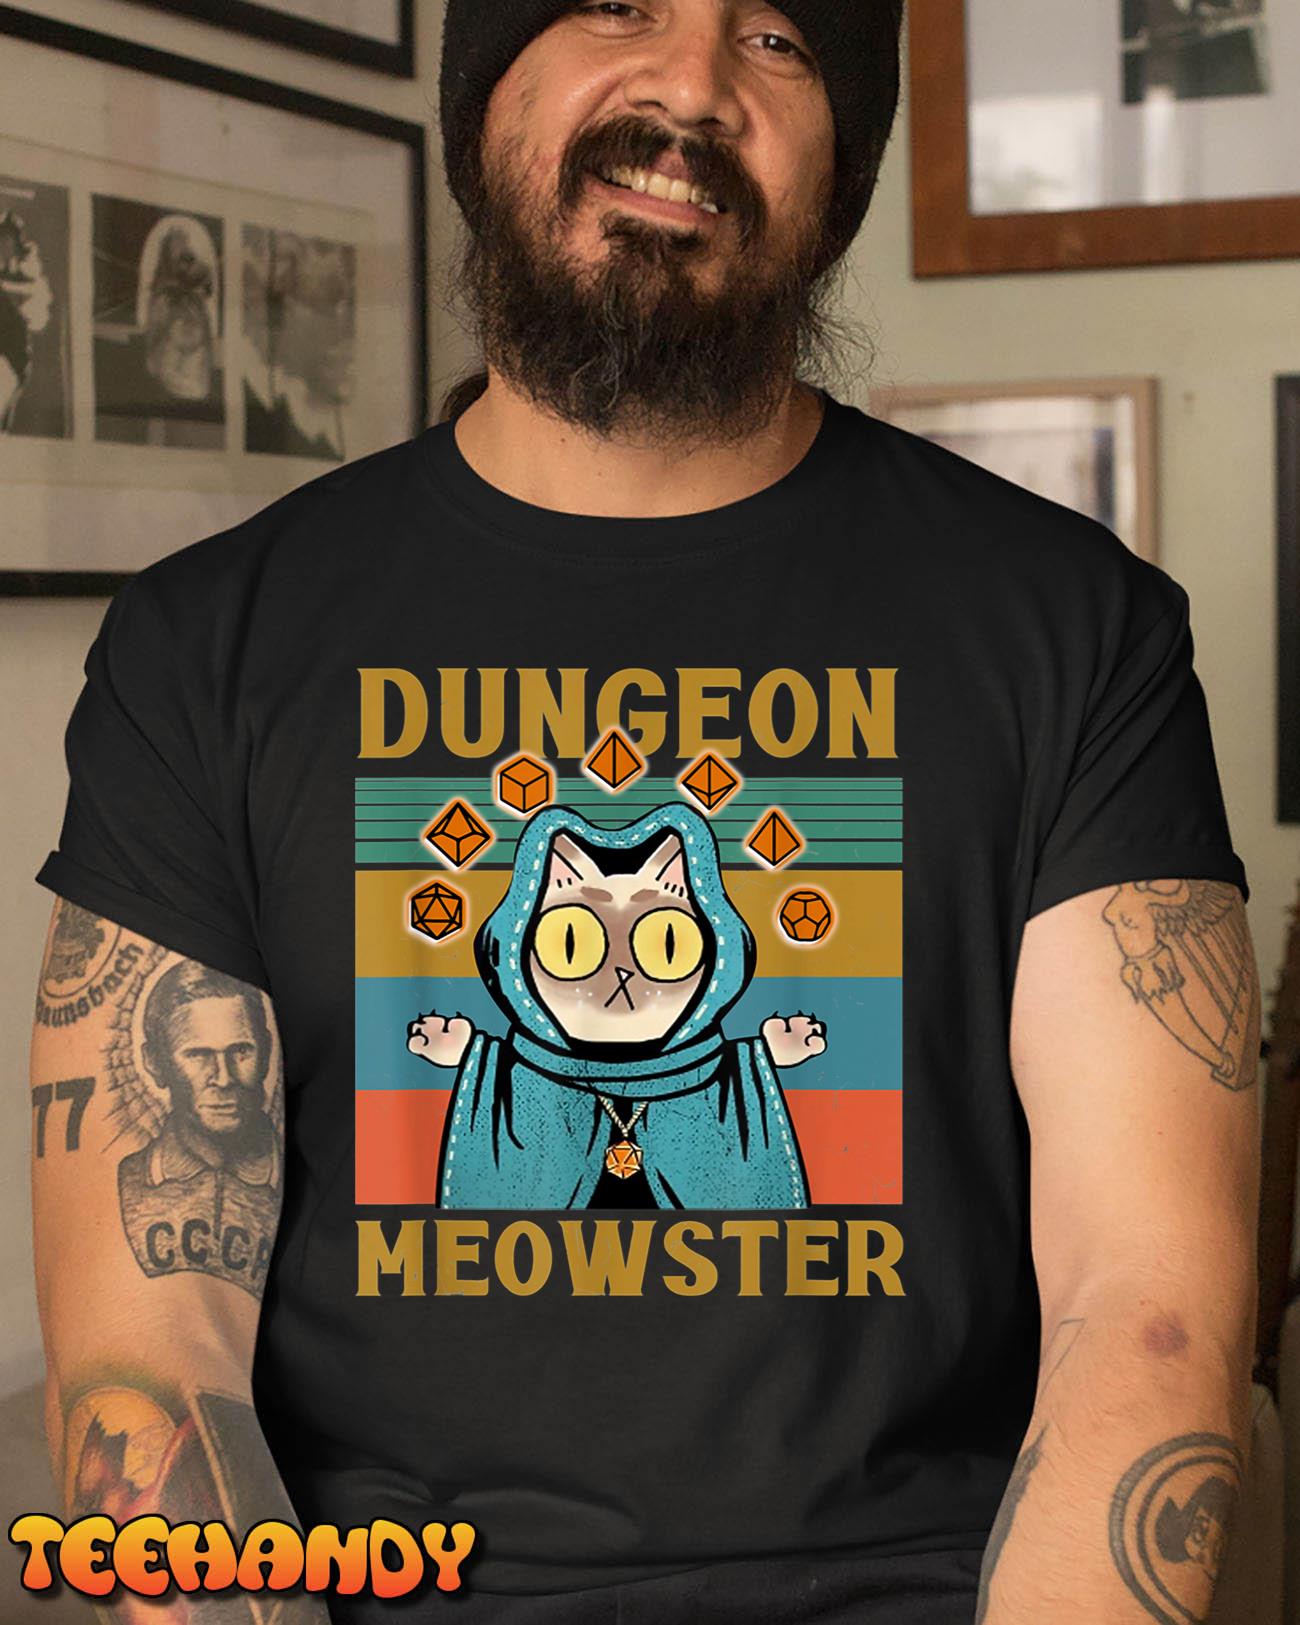 Dungeon Meowster Funny Nerdy-Gamer Cat-D20 Dice RPG T-Shirt